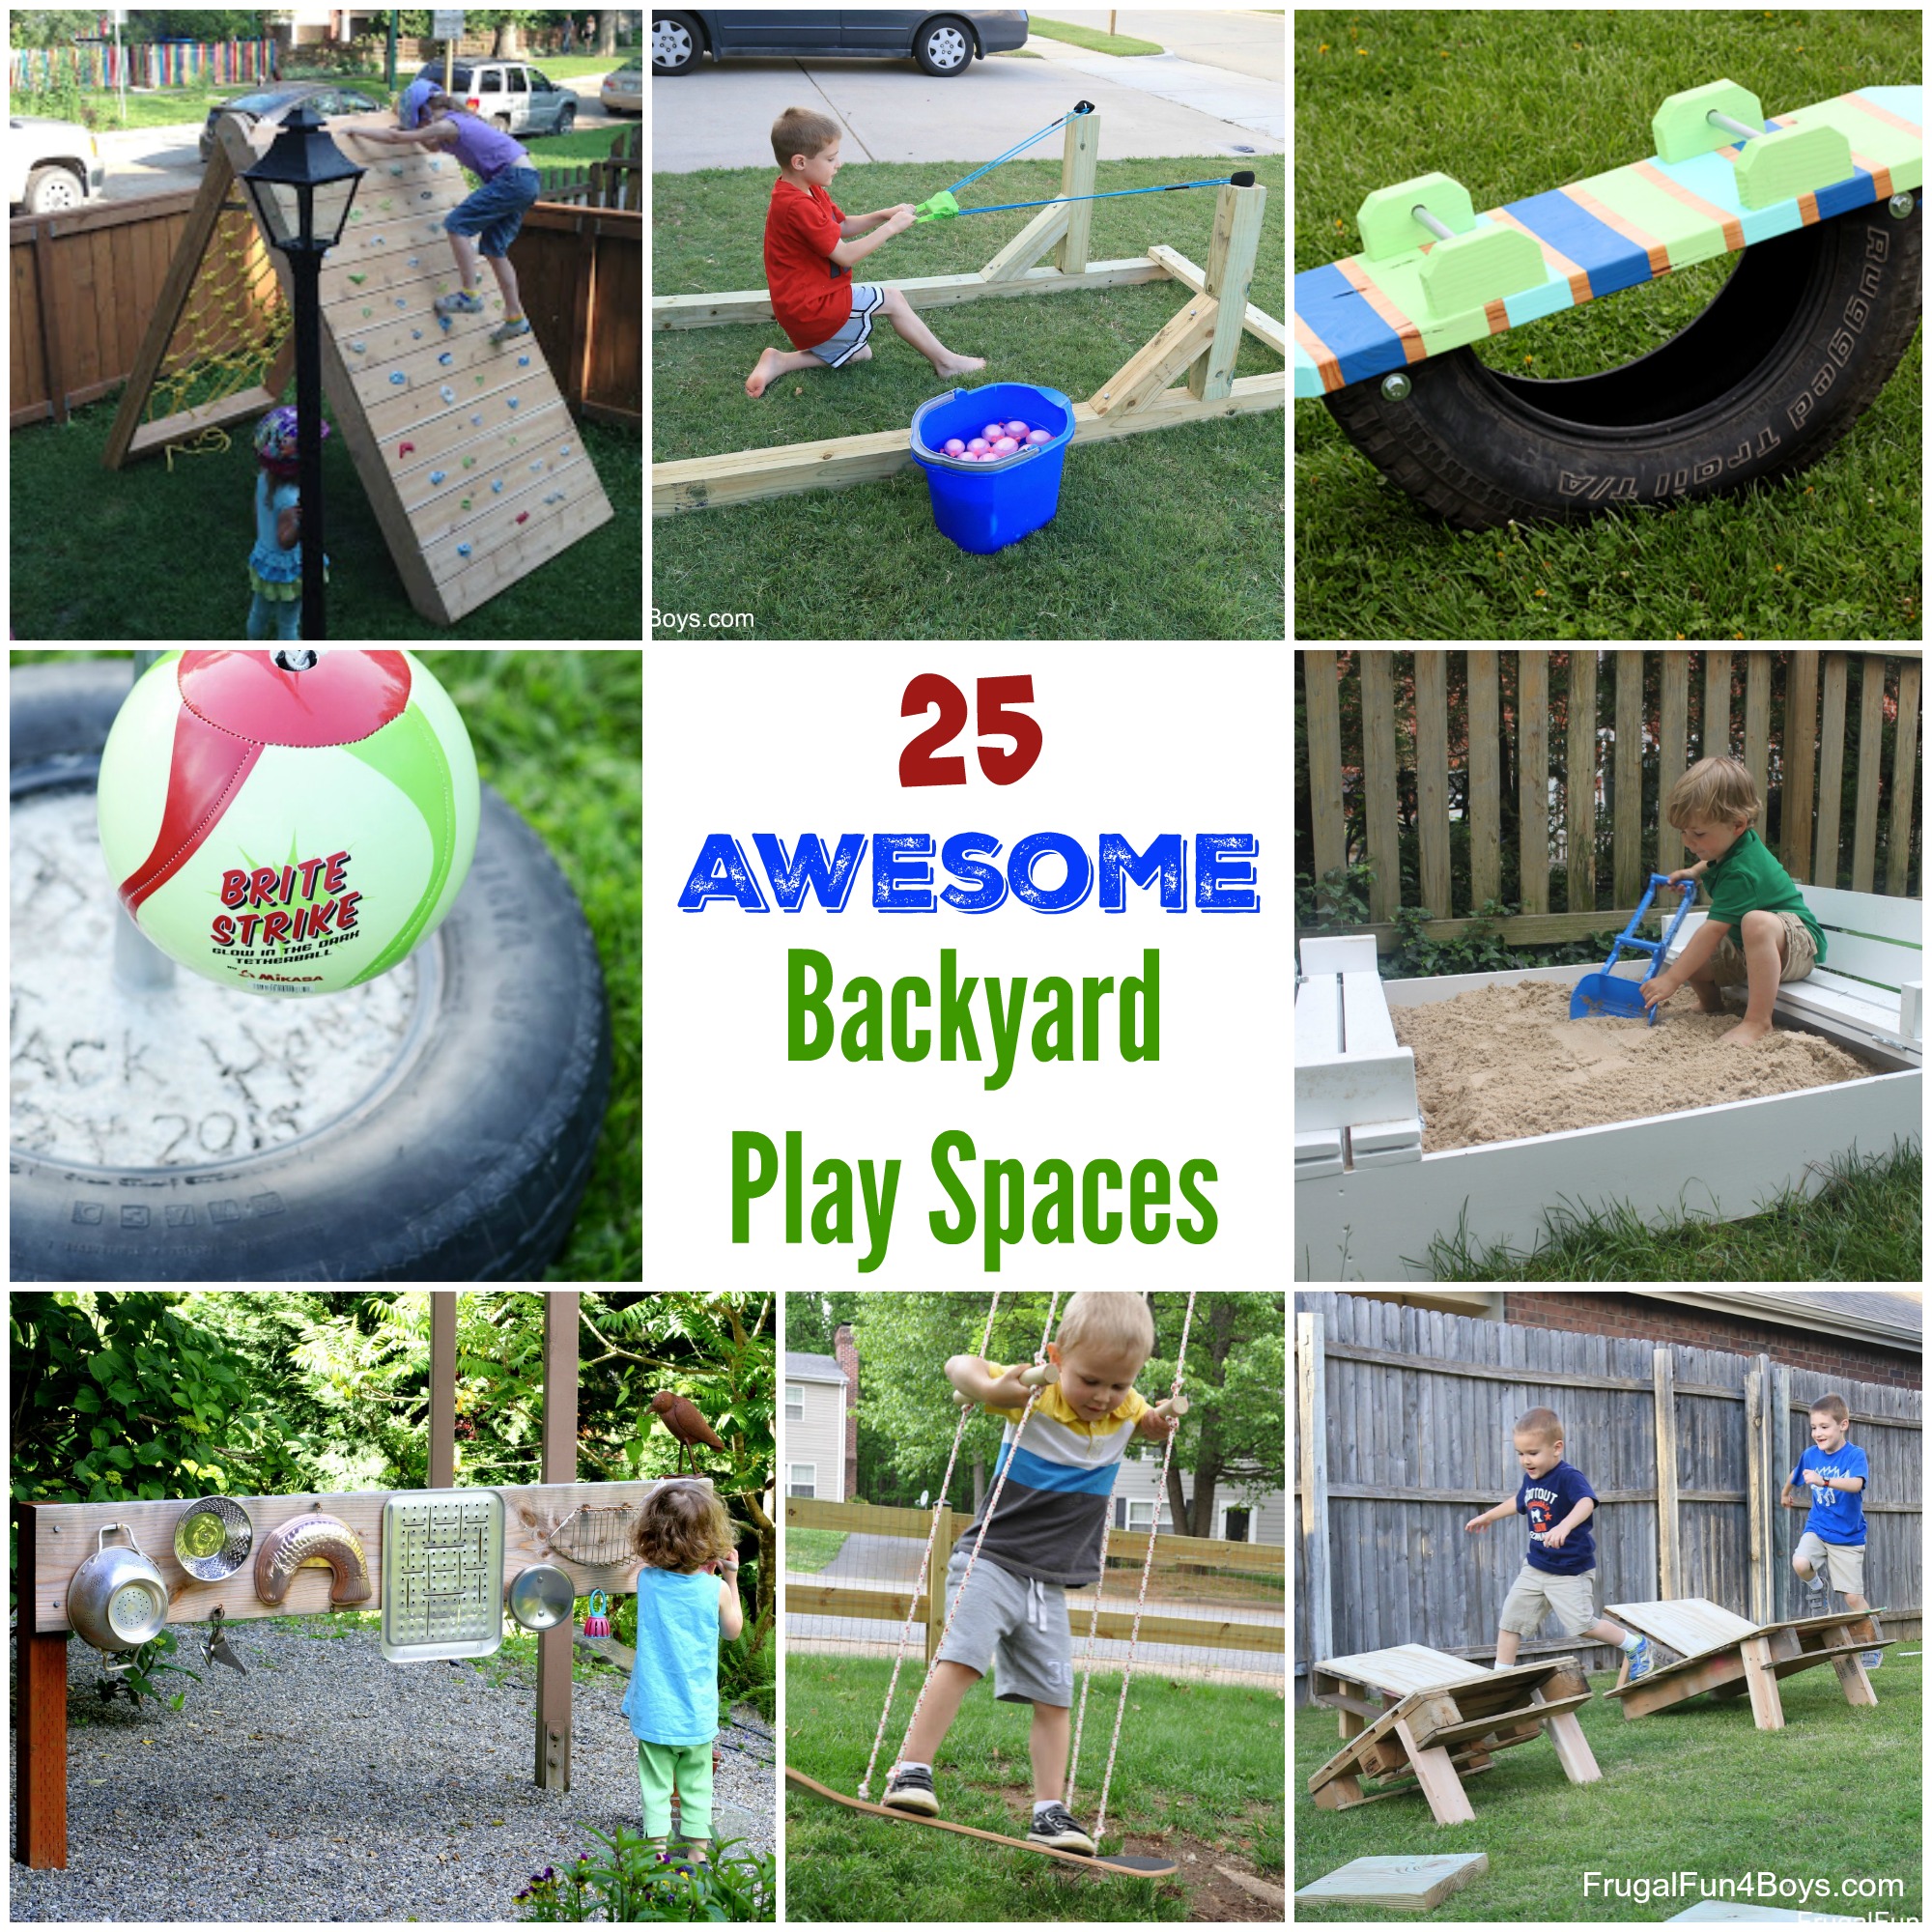 25 Awesome Backyard Play Spaces - Build climbing structures, outdoor toys, and more!